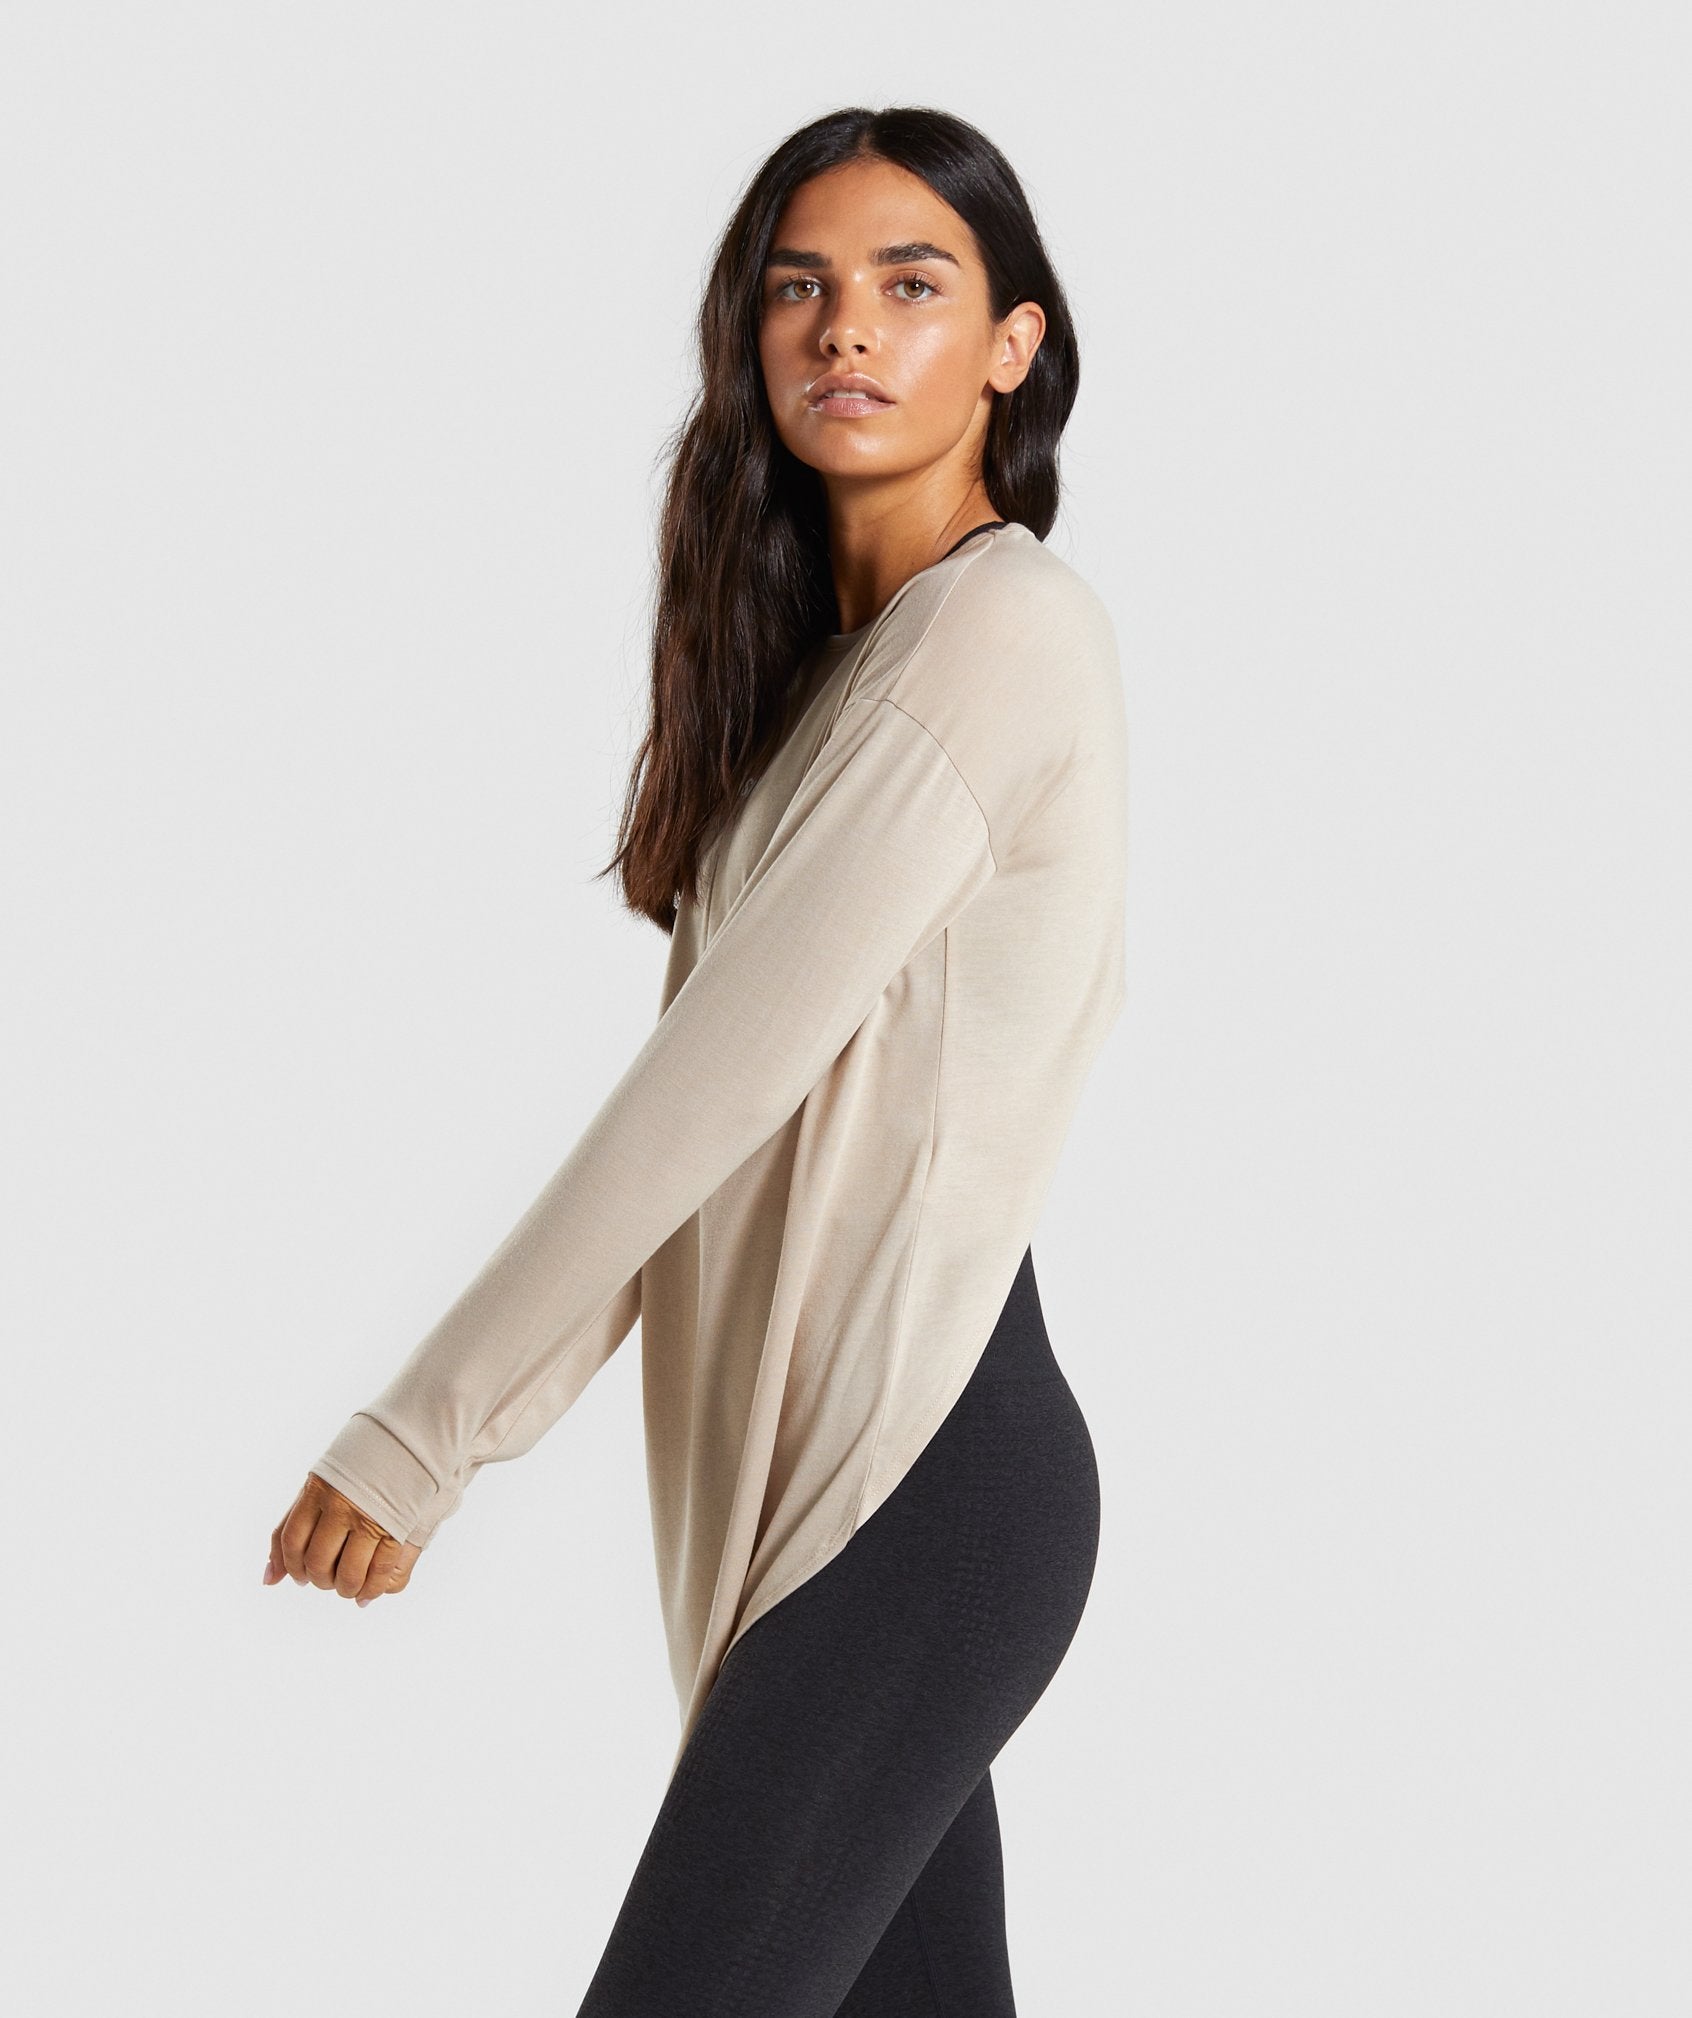 Ark Long Sleeve Top in Sand - view 3